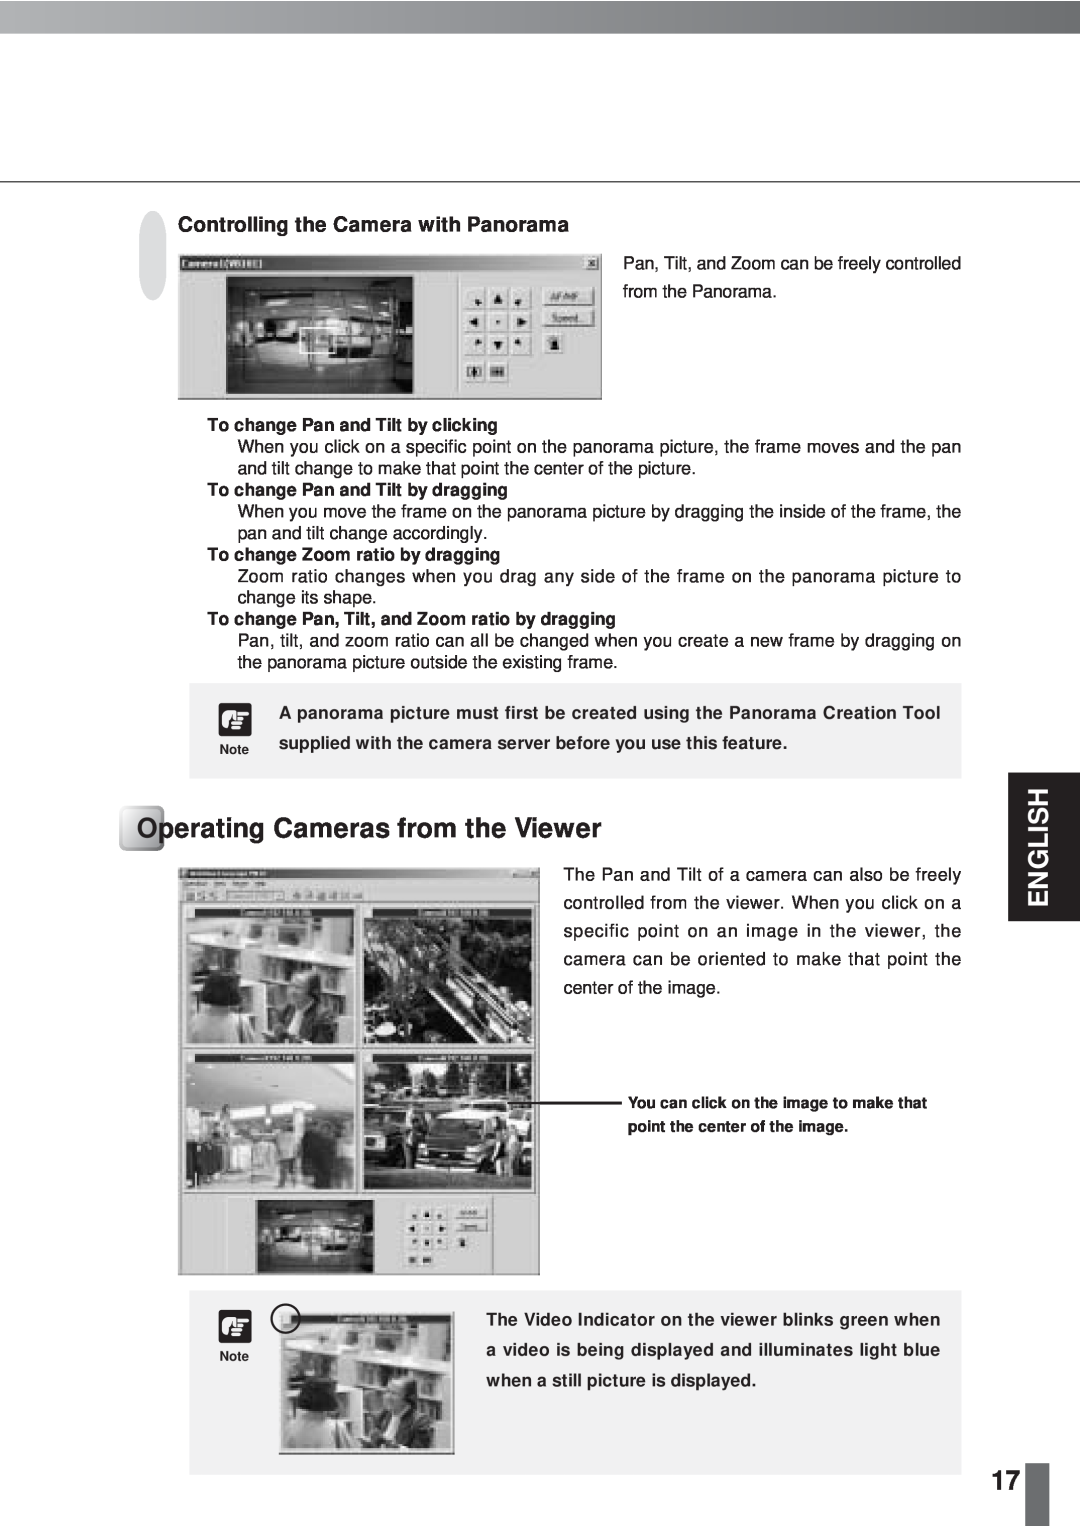 Canon 2.1 user manual Operating Cameras from the Viewer, English, Controlling the Camera with Panorama 